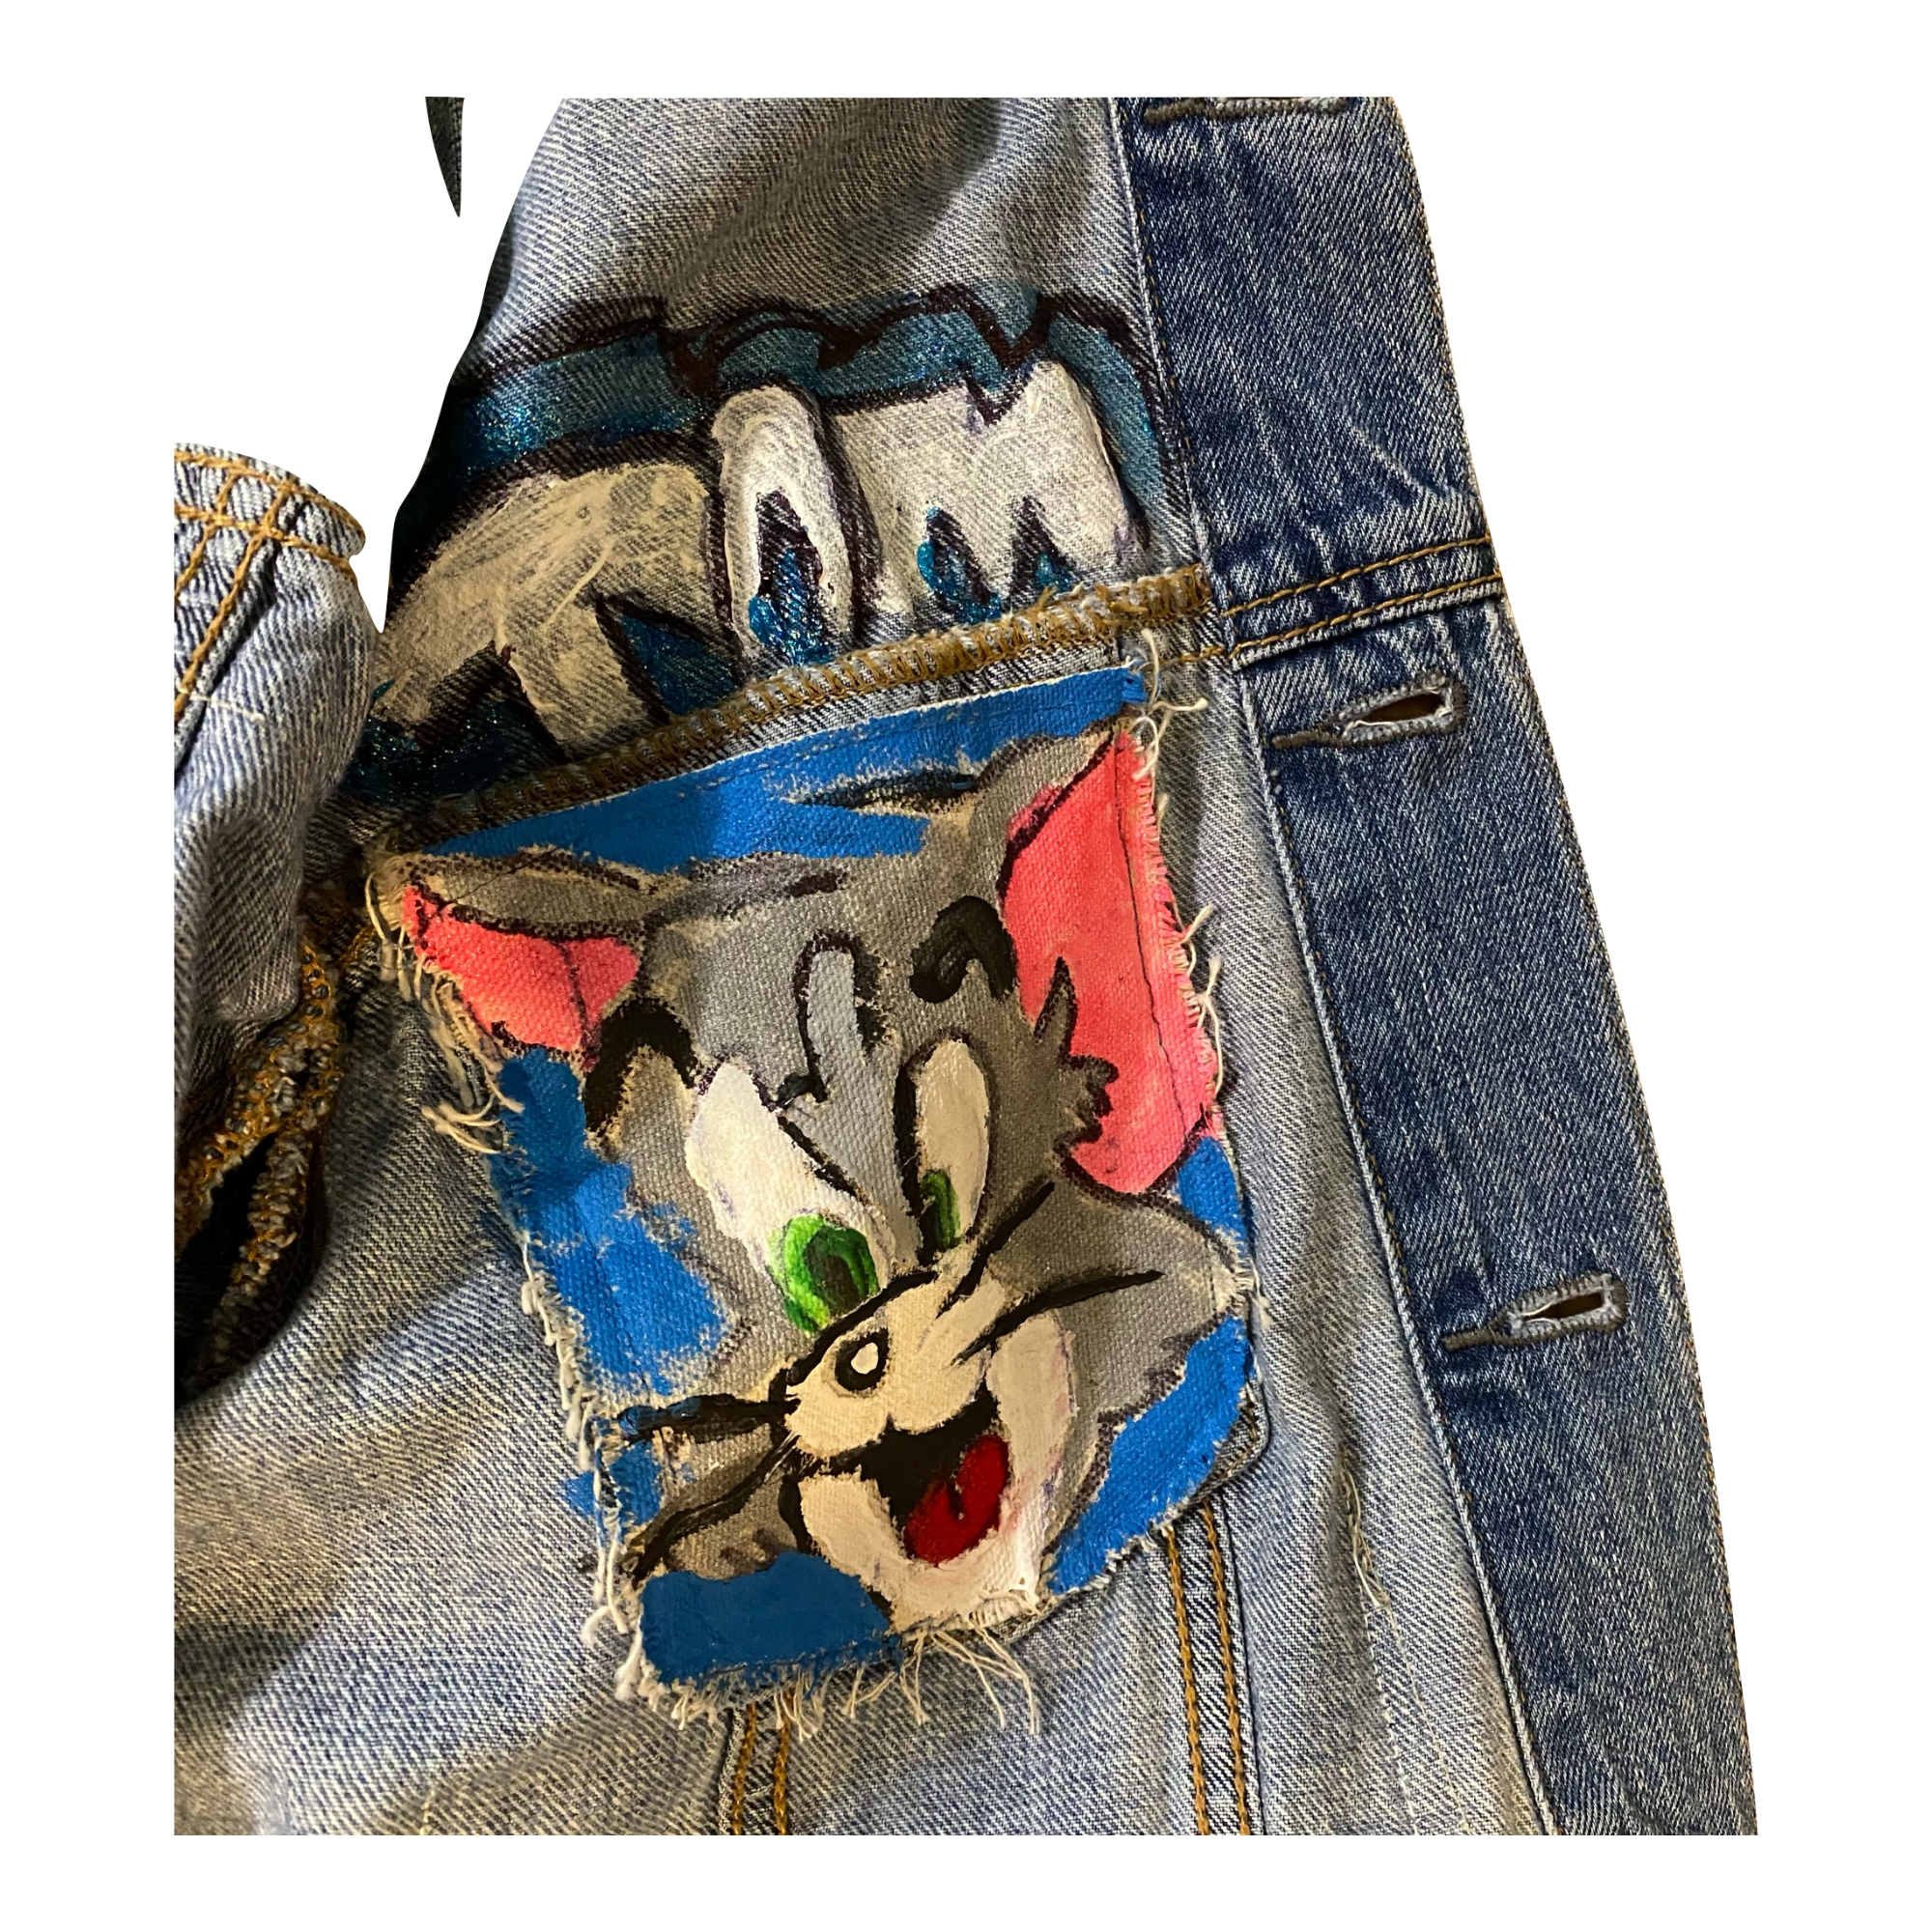 Hand Painted Tom & Jerry Jacket 